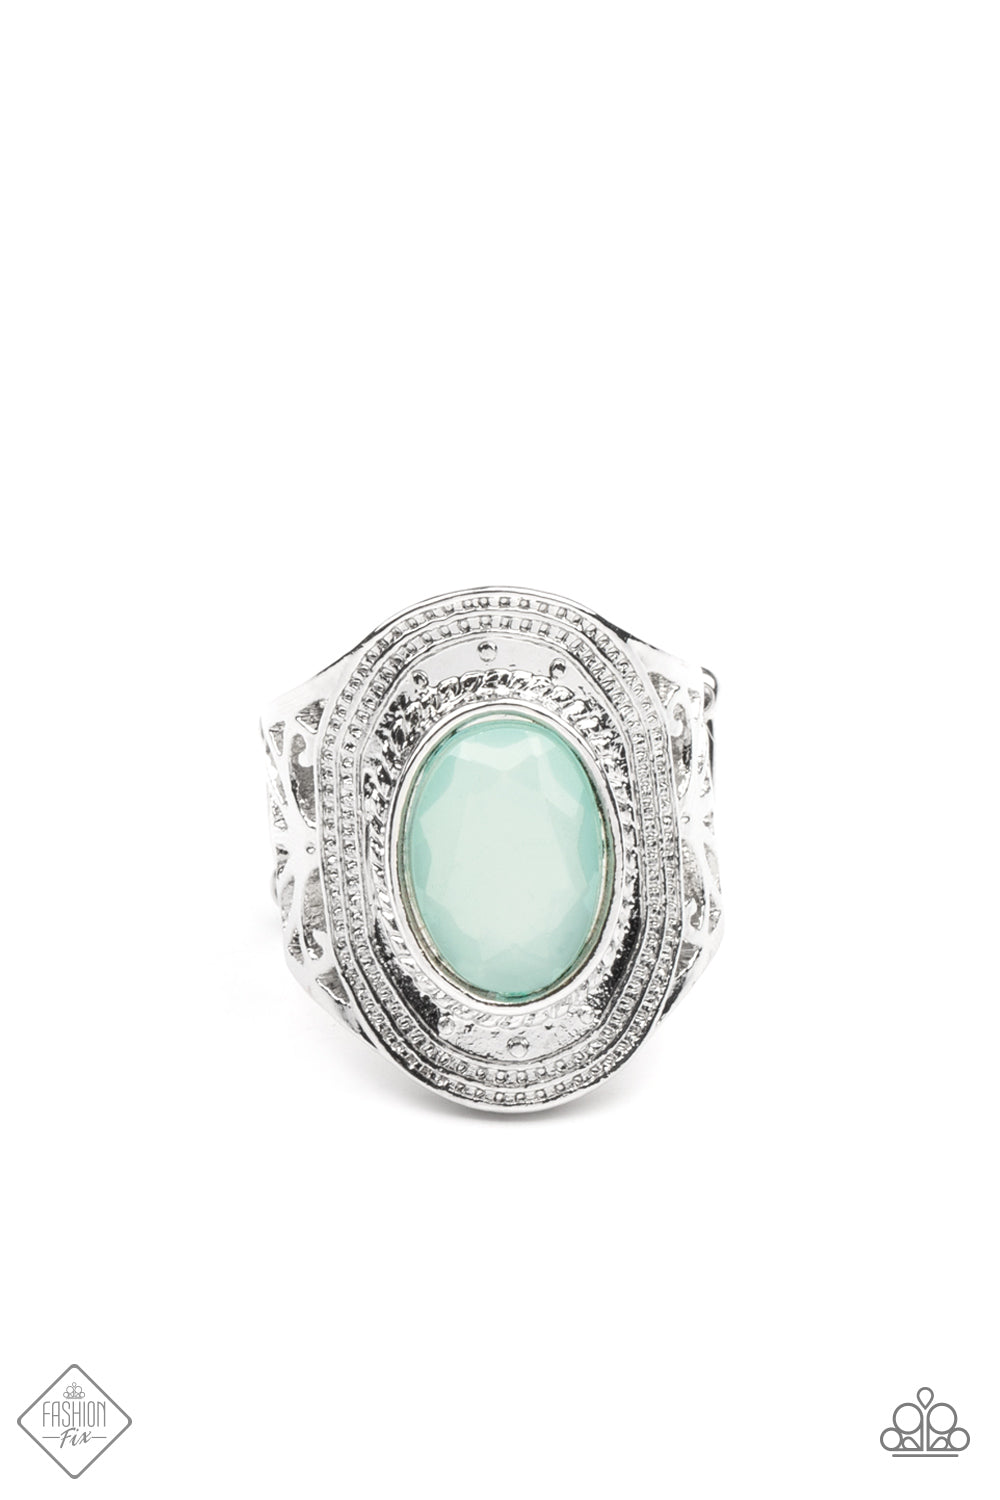 Calm And Classy Ring__Blue